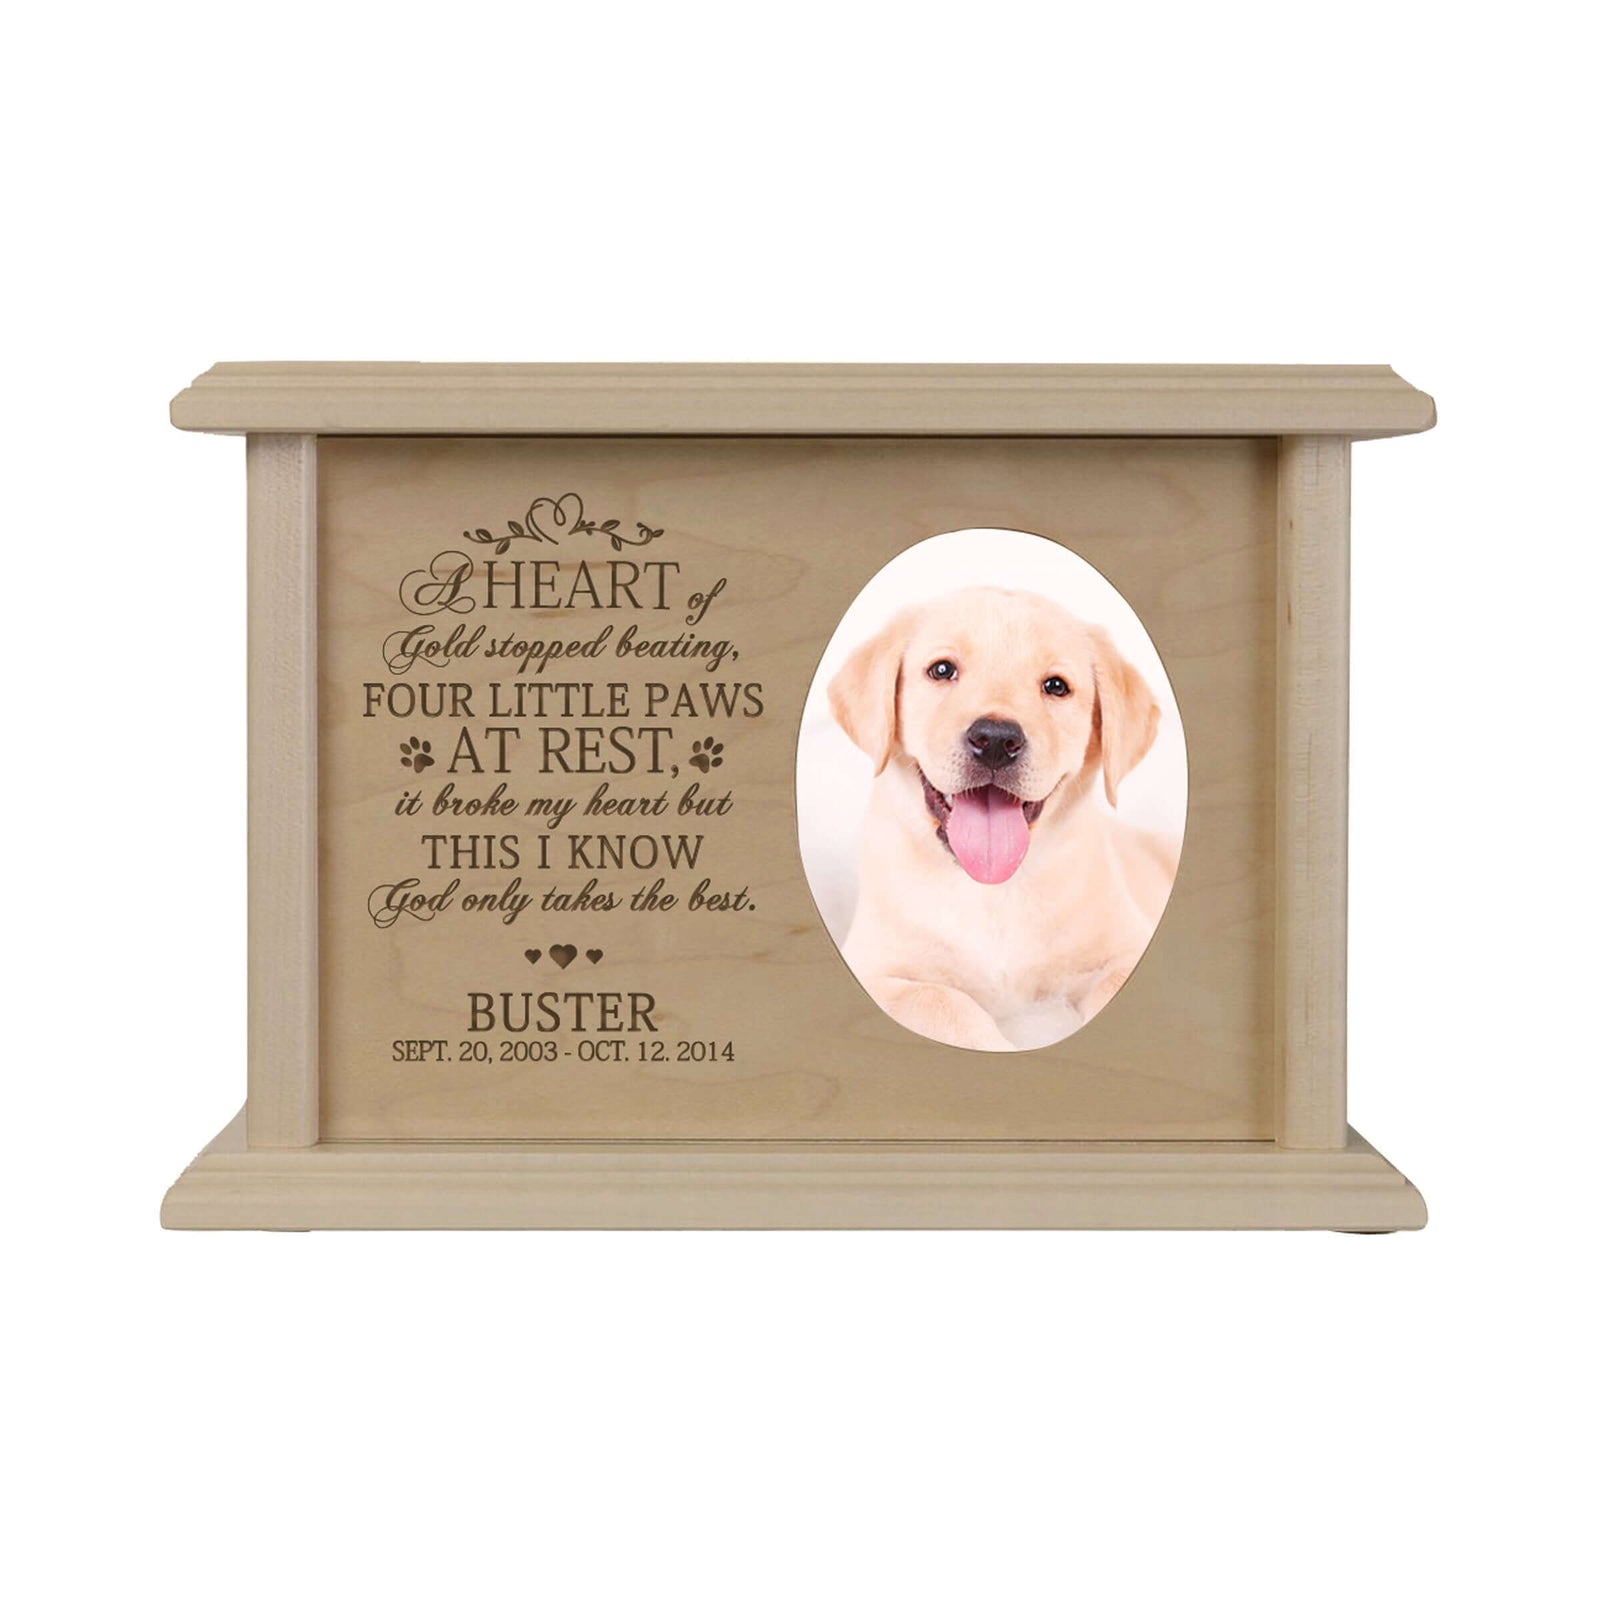 Pet Memorial Picture Cremation Urn Box for Dog or Cat - A Heart of Gold